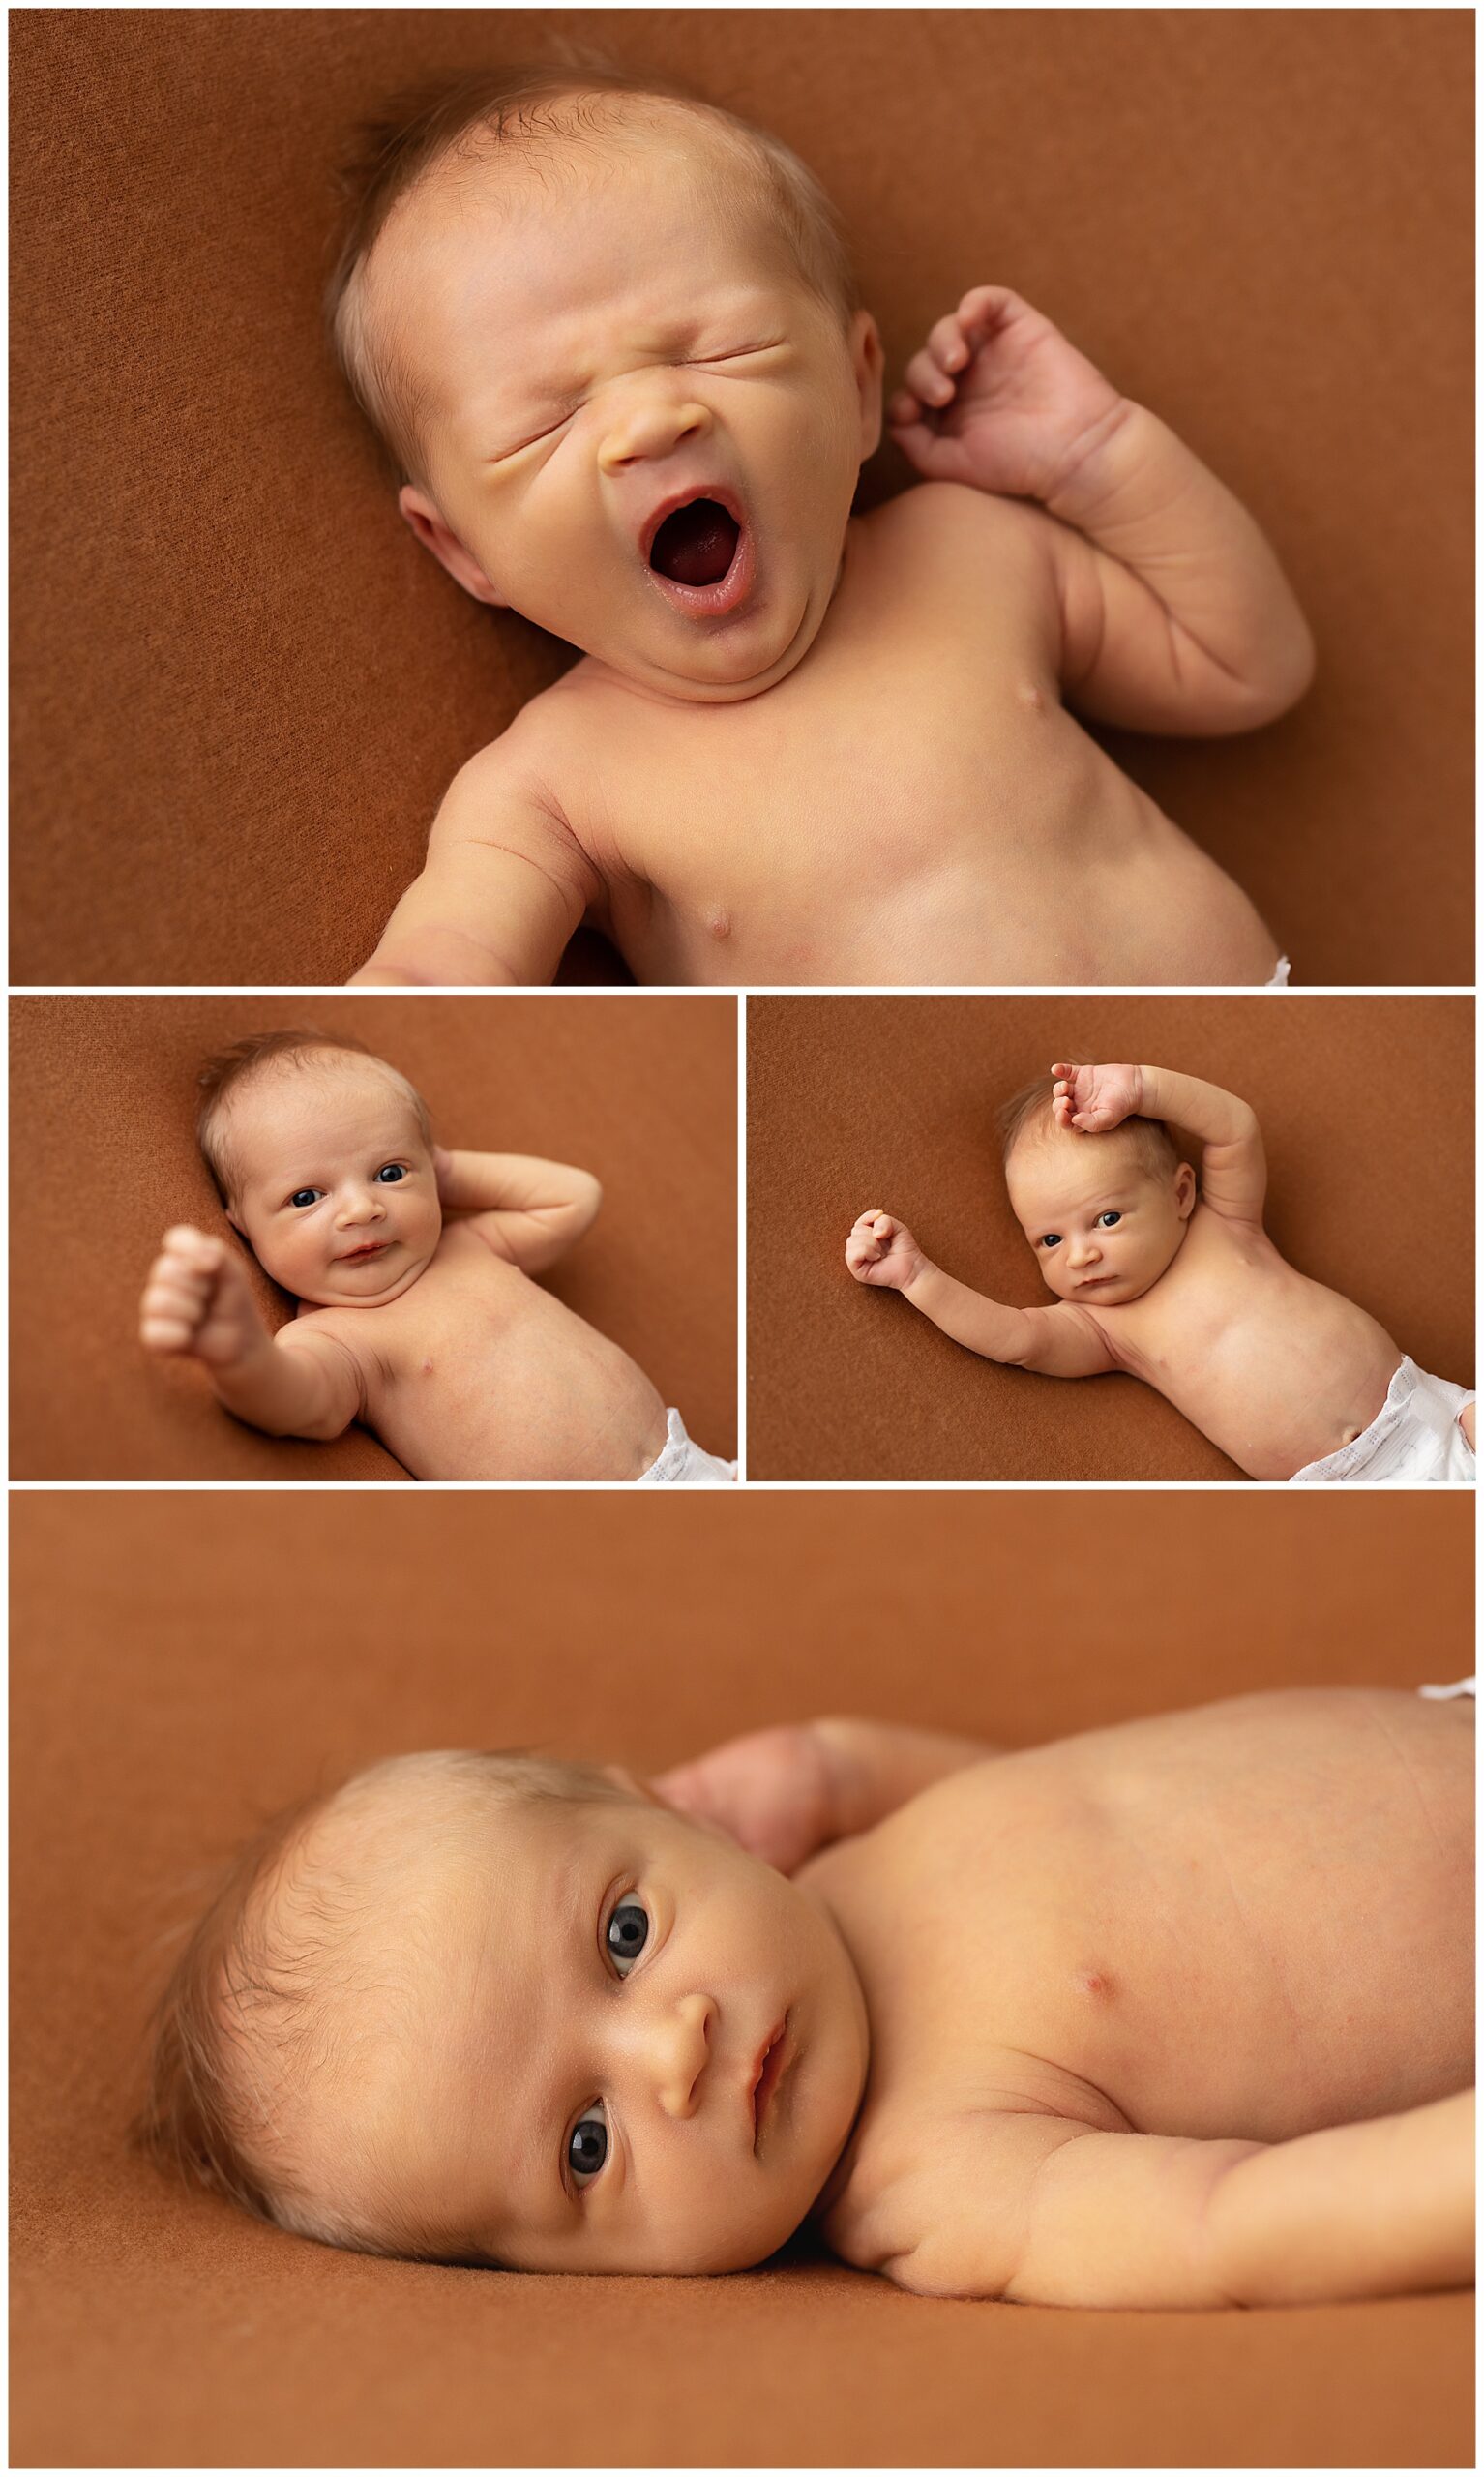 big yawn and stretch for this newborn baby boy during his newborn photo session in the studio